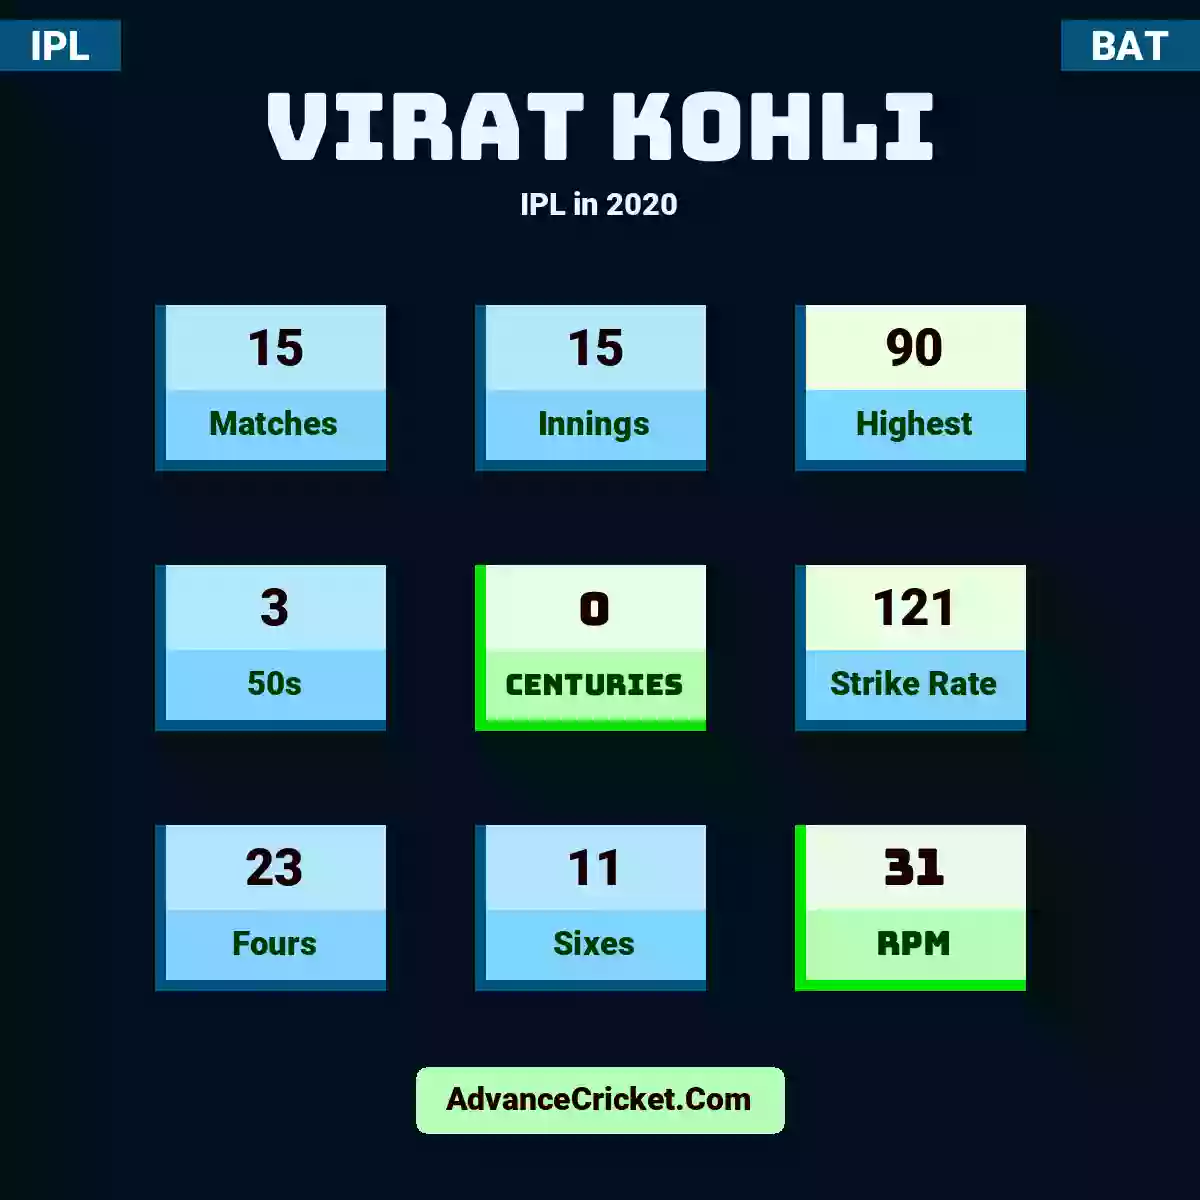 Virat Kohli IPL  in 2020, Virat Kohli played 15 matches, scored 90 runs as highest, 3 half-centuries, and 0 centuries, with a strike rate of 121. V.Kohli hit 23 fours and 11 sixes, with an RPM of 31.